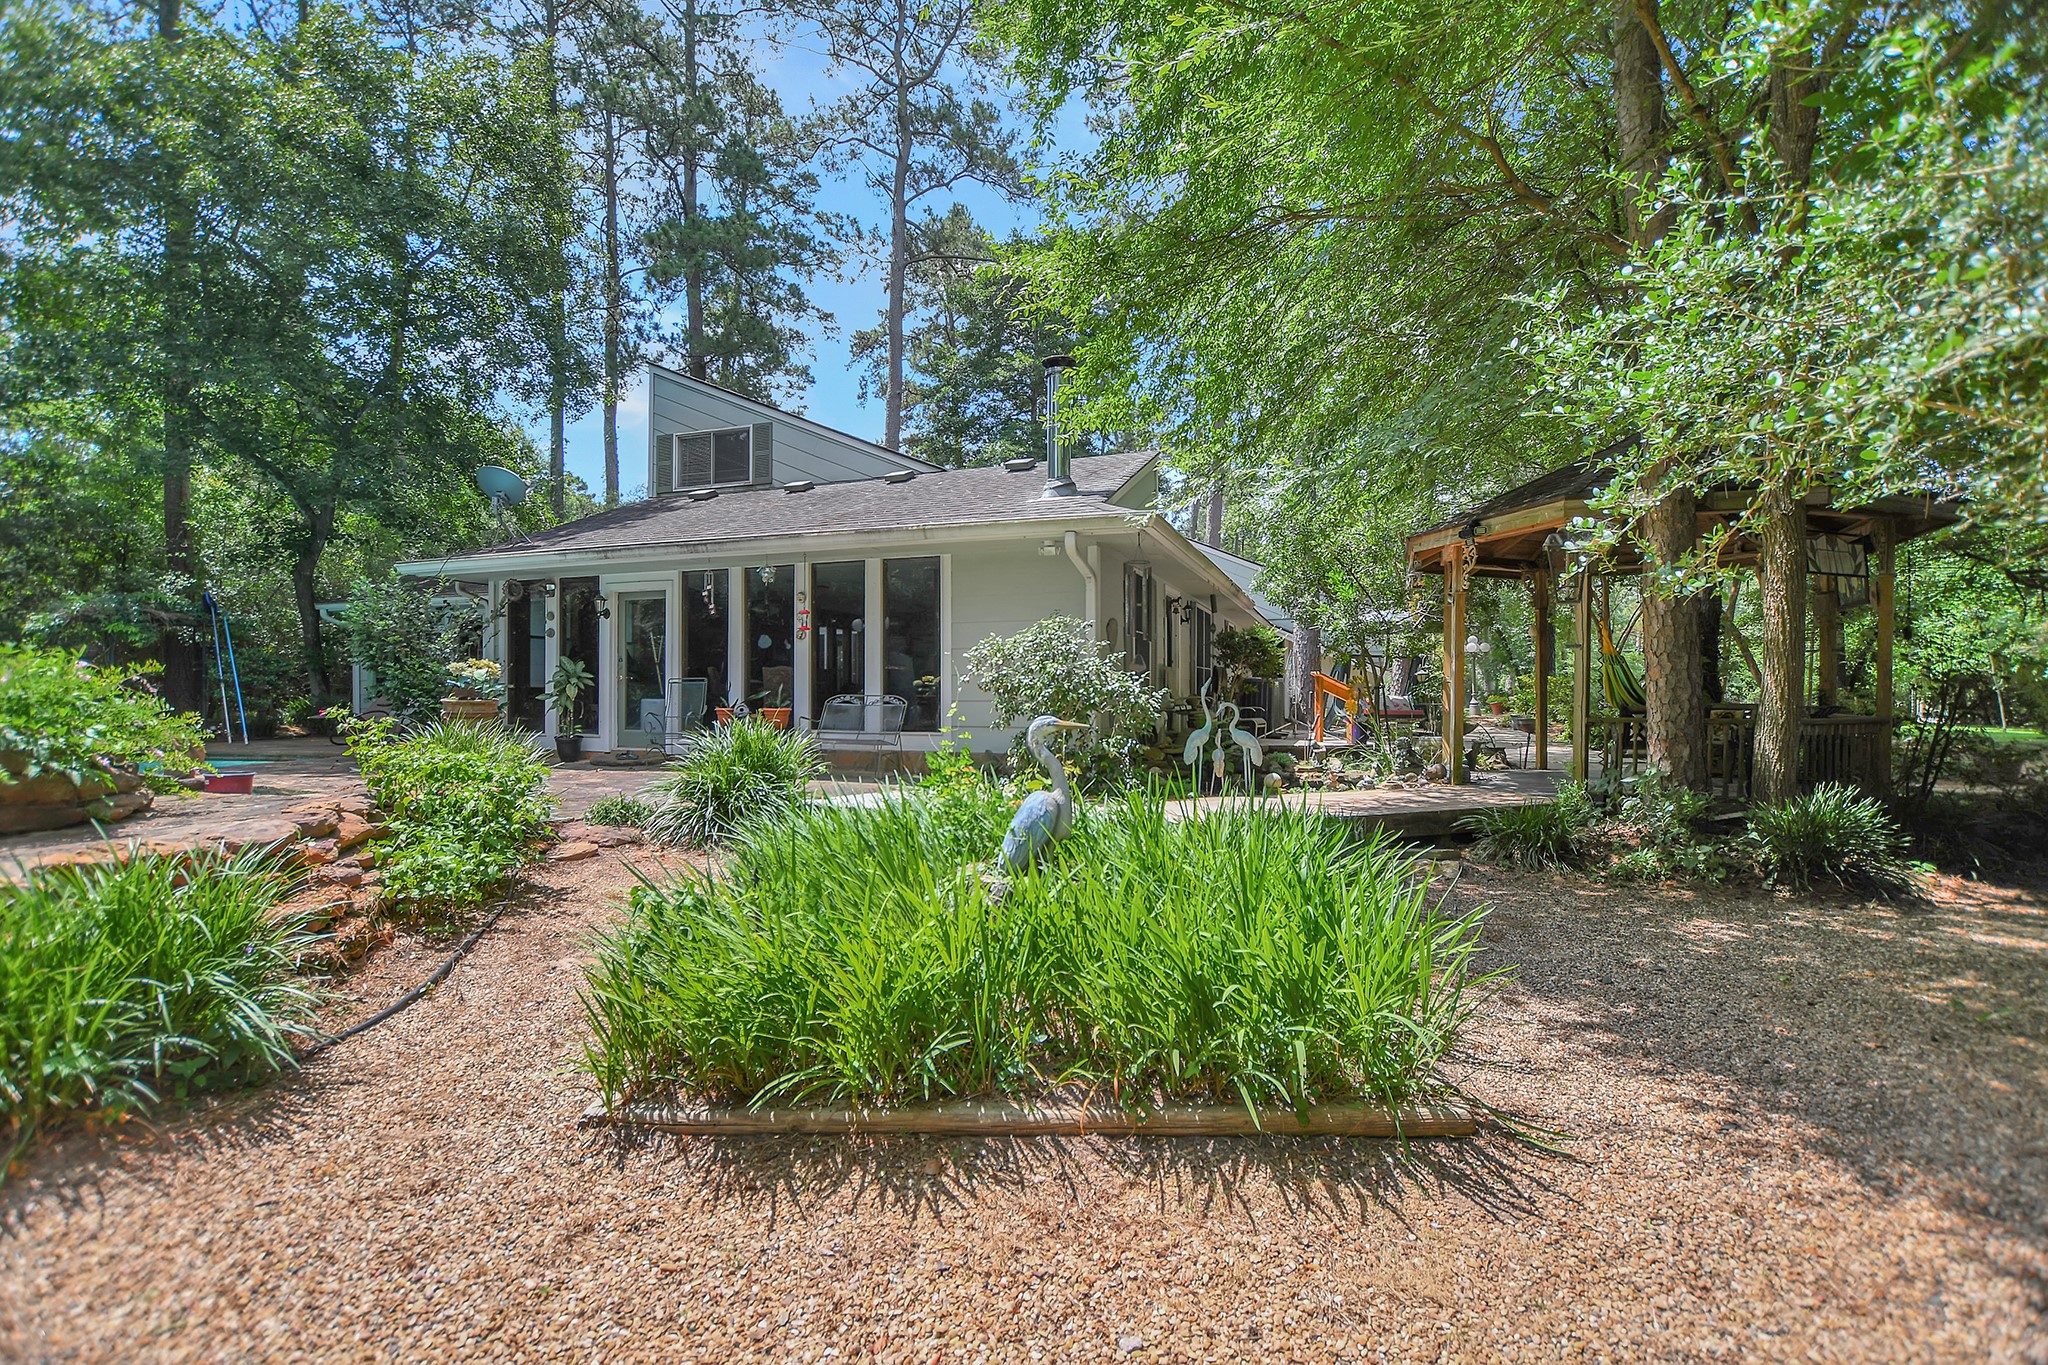 Welcome home to 14510 Decker Drive - located near the end of a dead-end street on 1.9 acres in a restricted neighborhood (with no HOA) plus 15.3+ unrestricted acres!